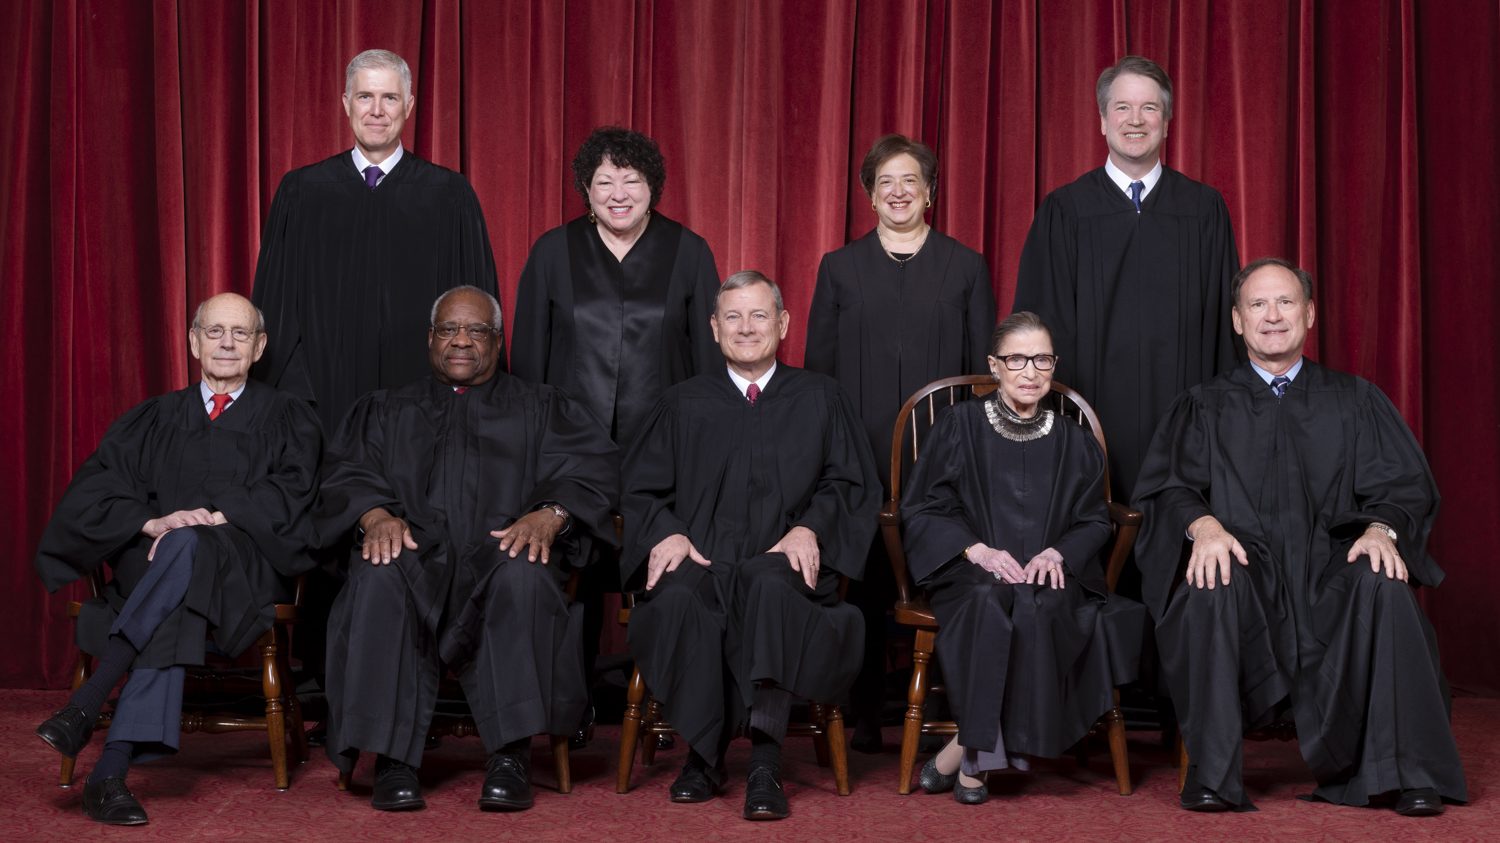 Who Are the Remaining Liberal Justices on the Supreme Court?